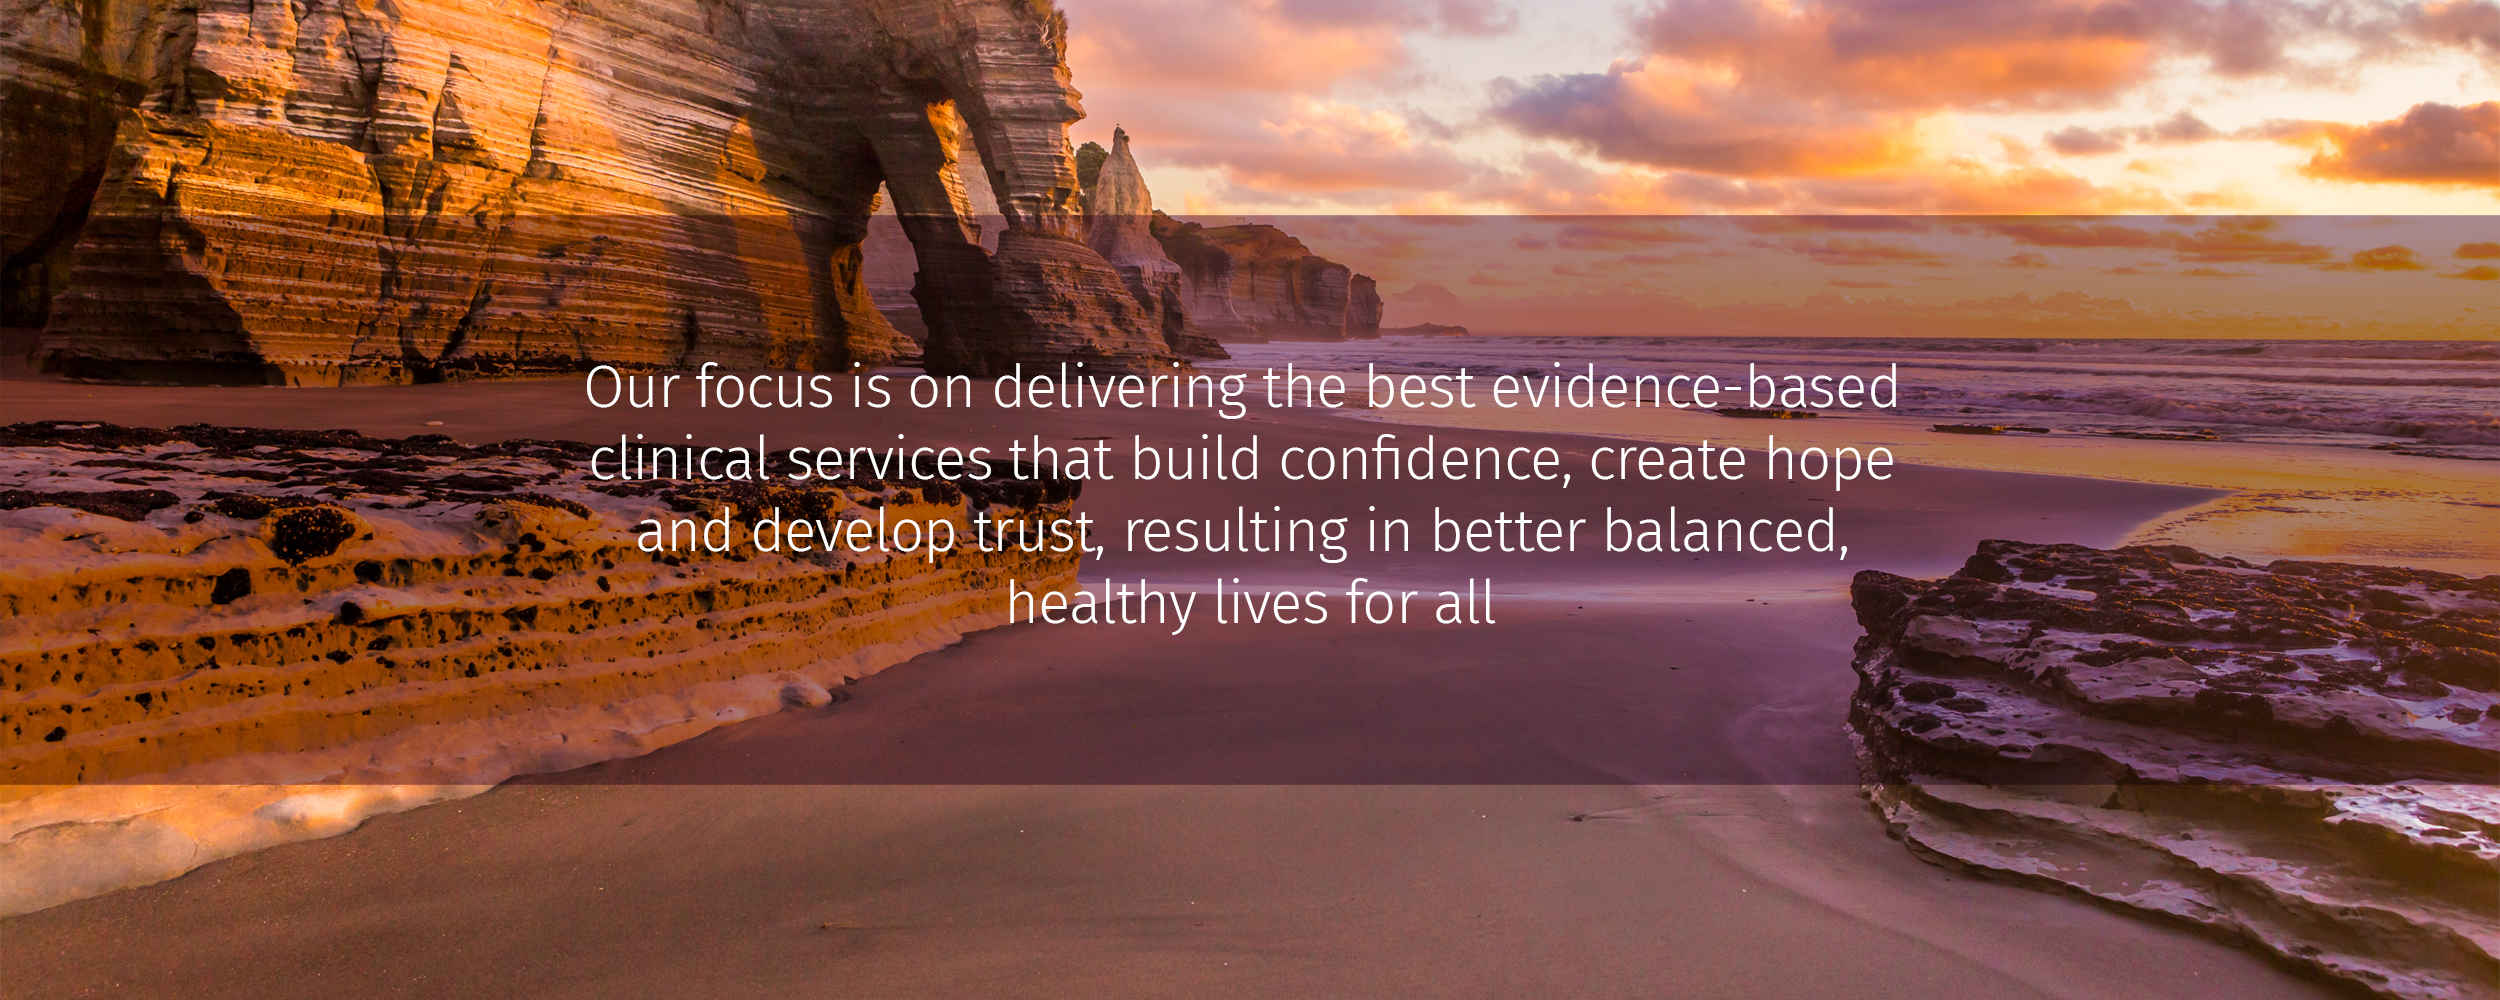 our focus is on delivering the best evidence-based clinical services that build confidence, create hope and develop trust, resulting in better balanced, healthy lives healthy lives for all